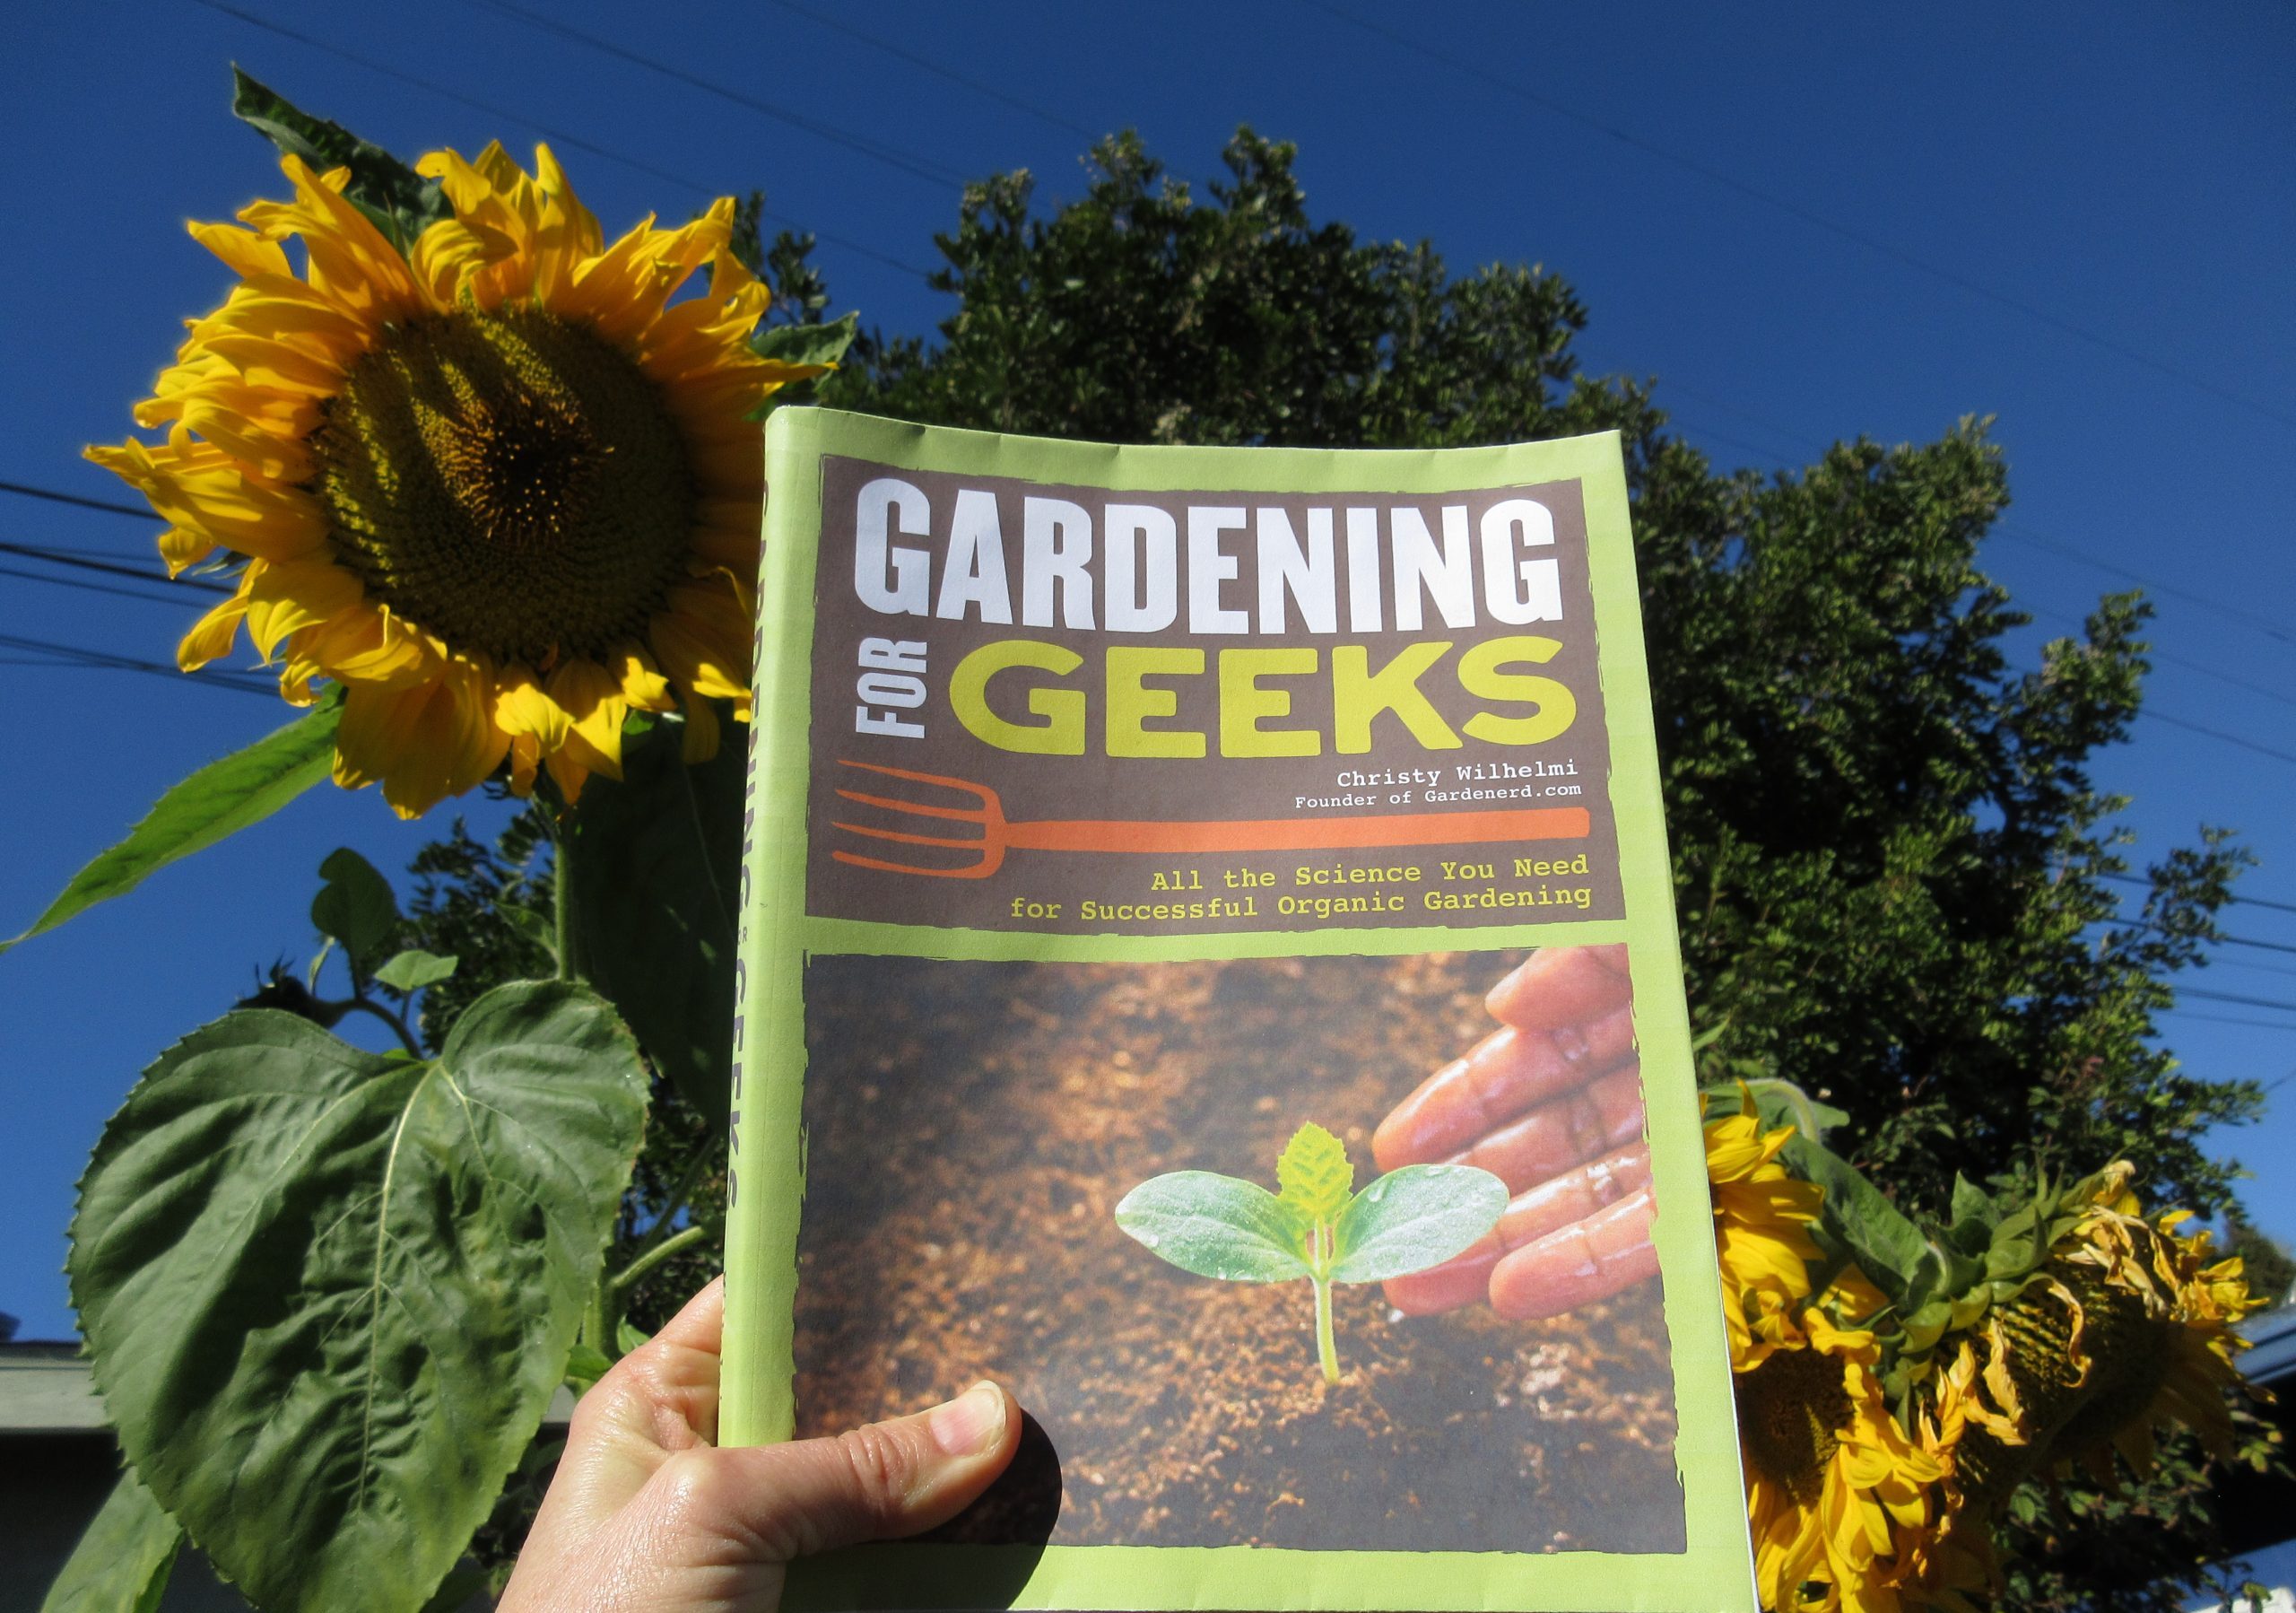 You are currently viewing Gardening For Geeks Launches 2-11-2020!